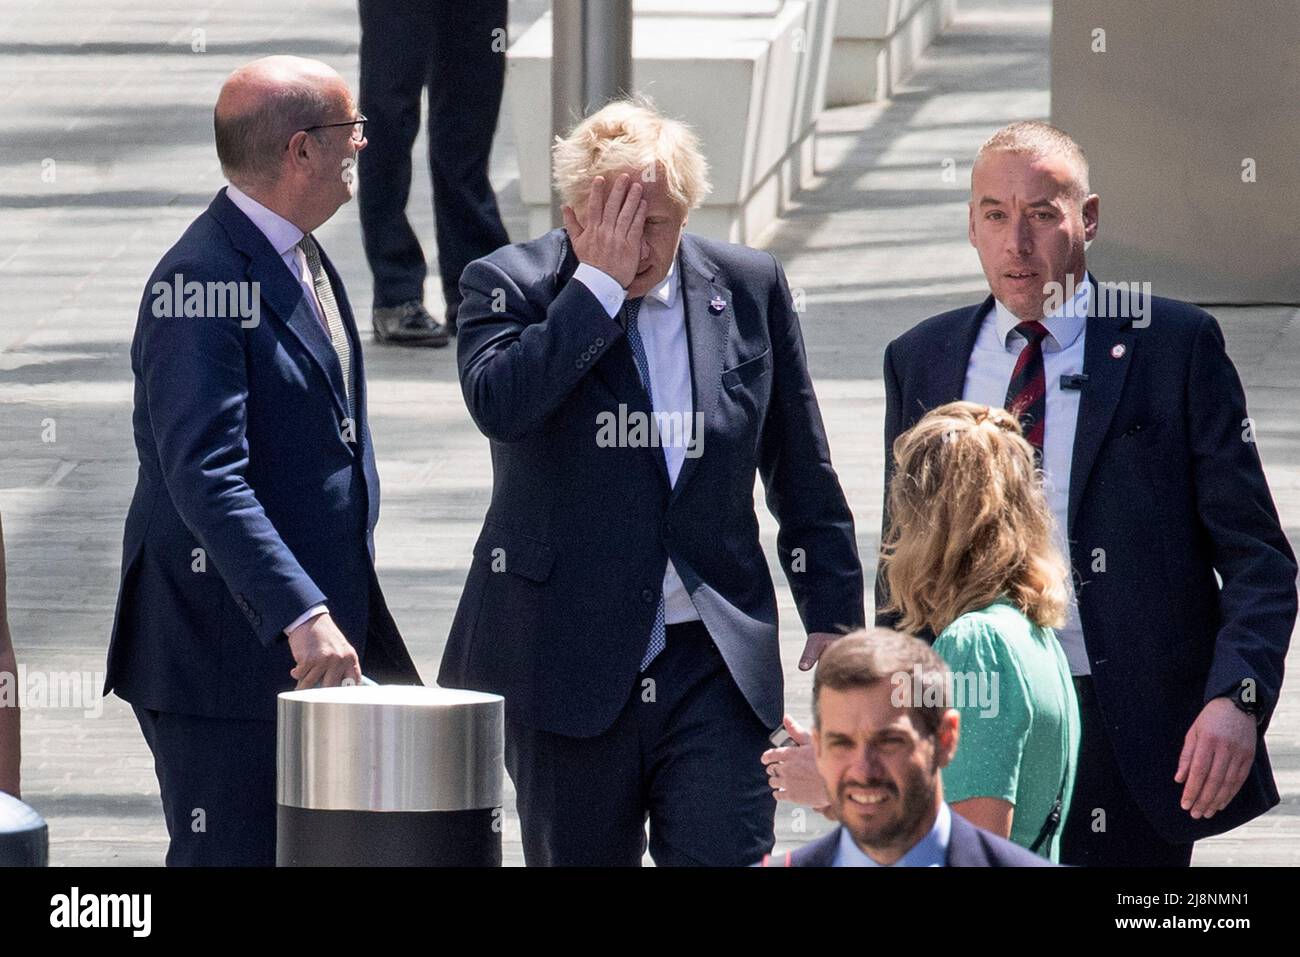 London - 17/05/2022. Prime Minister Boris Johnson is seen with his hand on his head as he leaves the opening of the new Elizabeth Line that was attended by Her Majesty Queen Elizabeth, at Paddington Station, West London. Mr Johnson and the Government are under pressure to resolve the Northern Ireland Protocol issues. Credit: Alamy Live News/Joshua Bratt Stock Photo